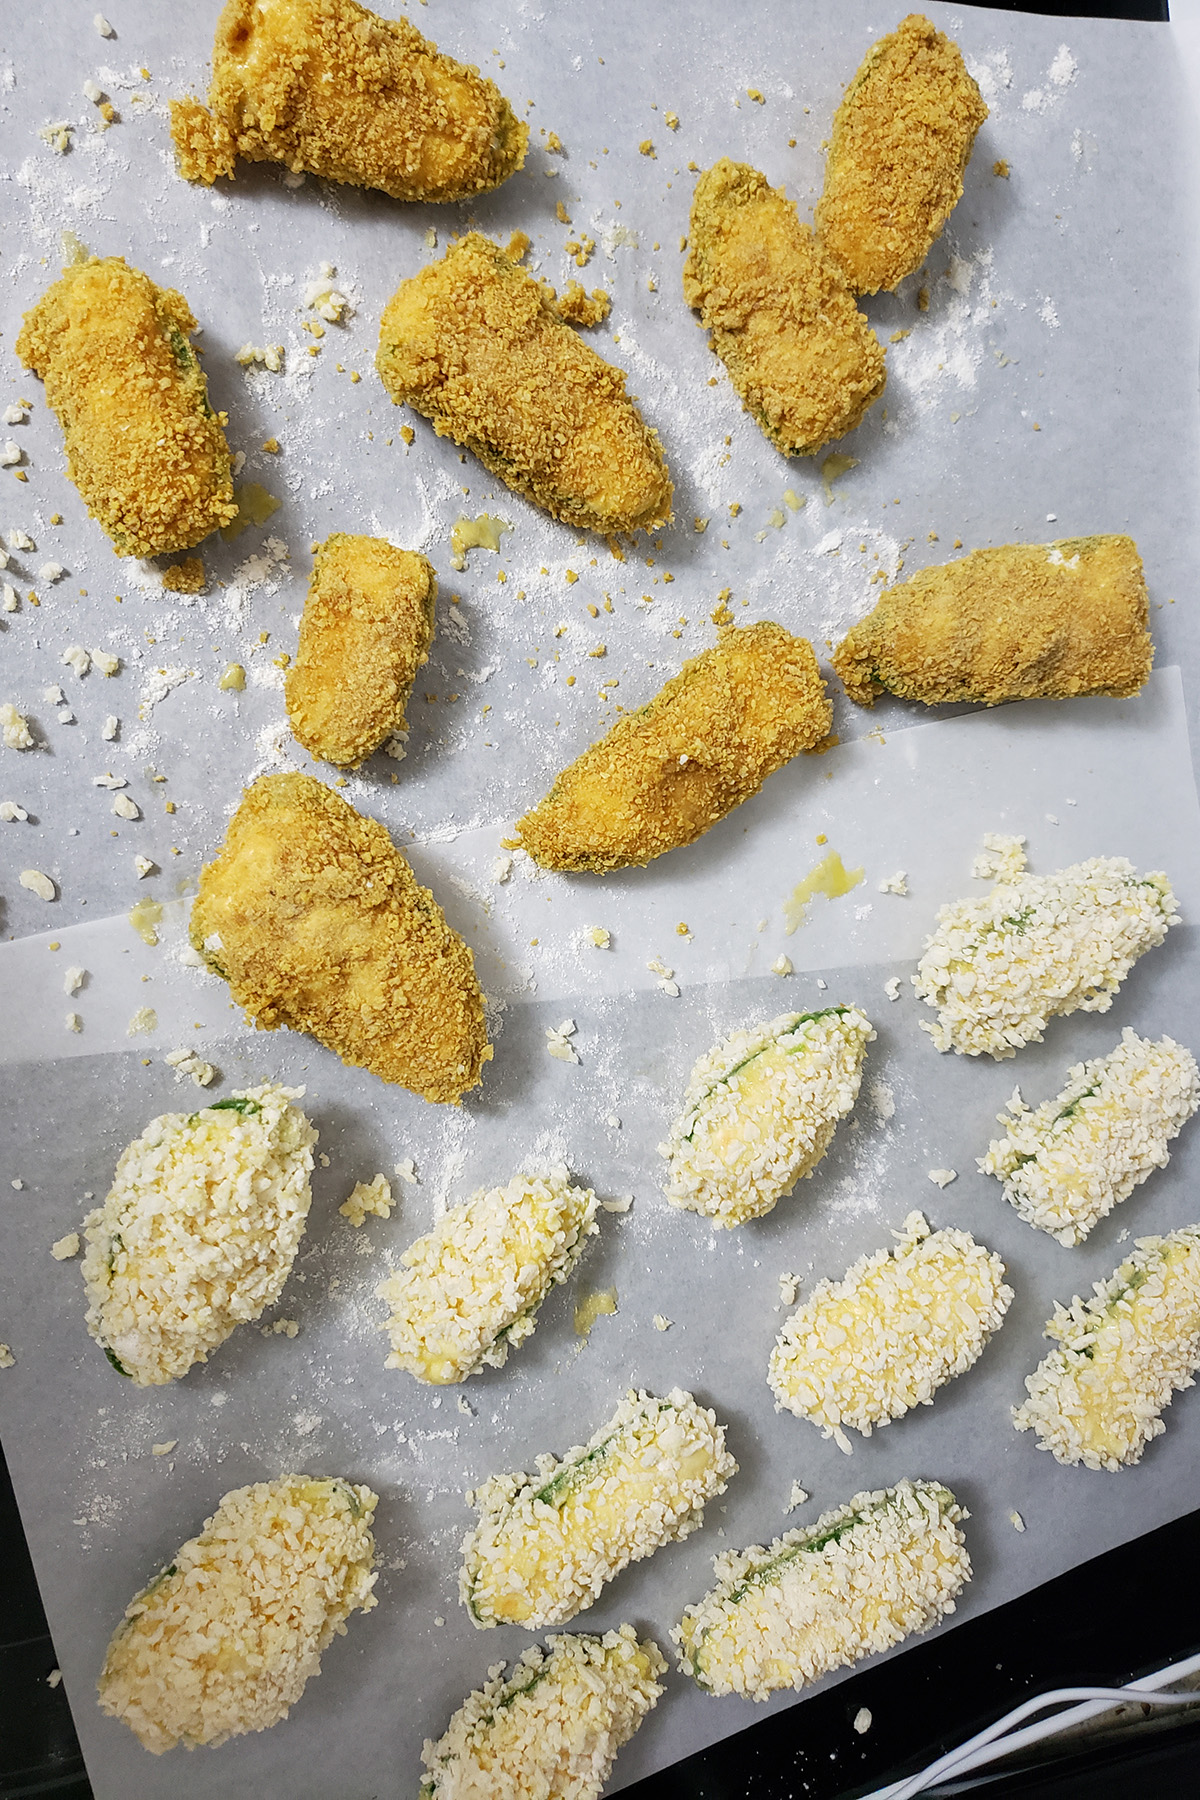 Jalapeno poppers have been coated in two different fillings and arranged on parchment paper.